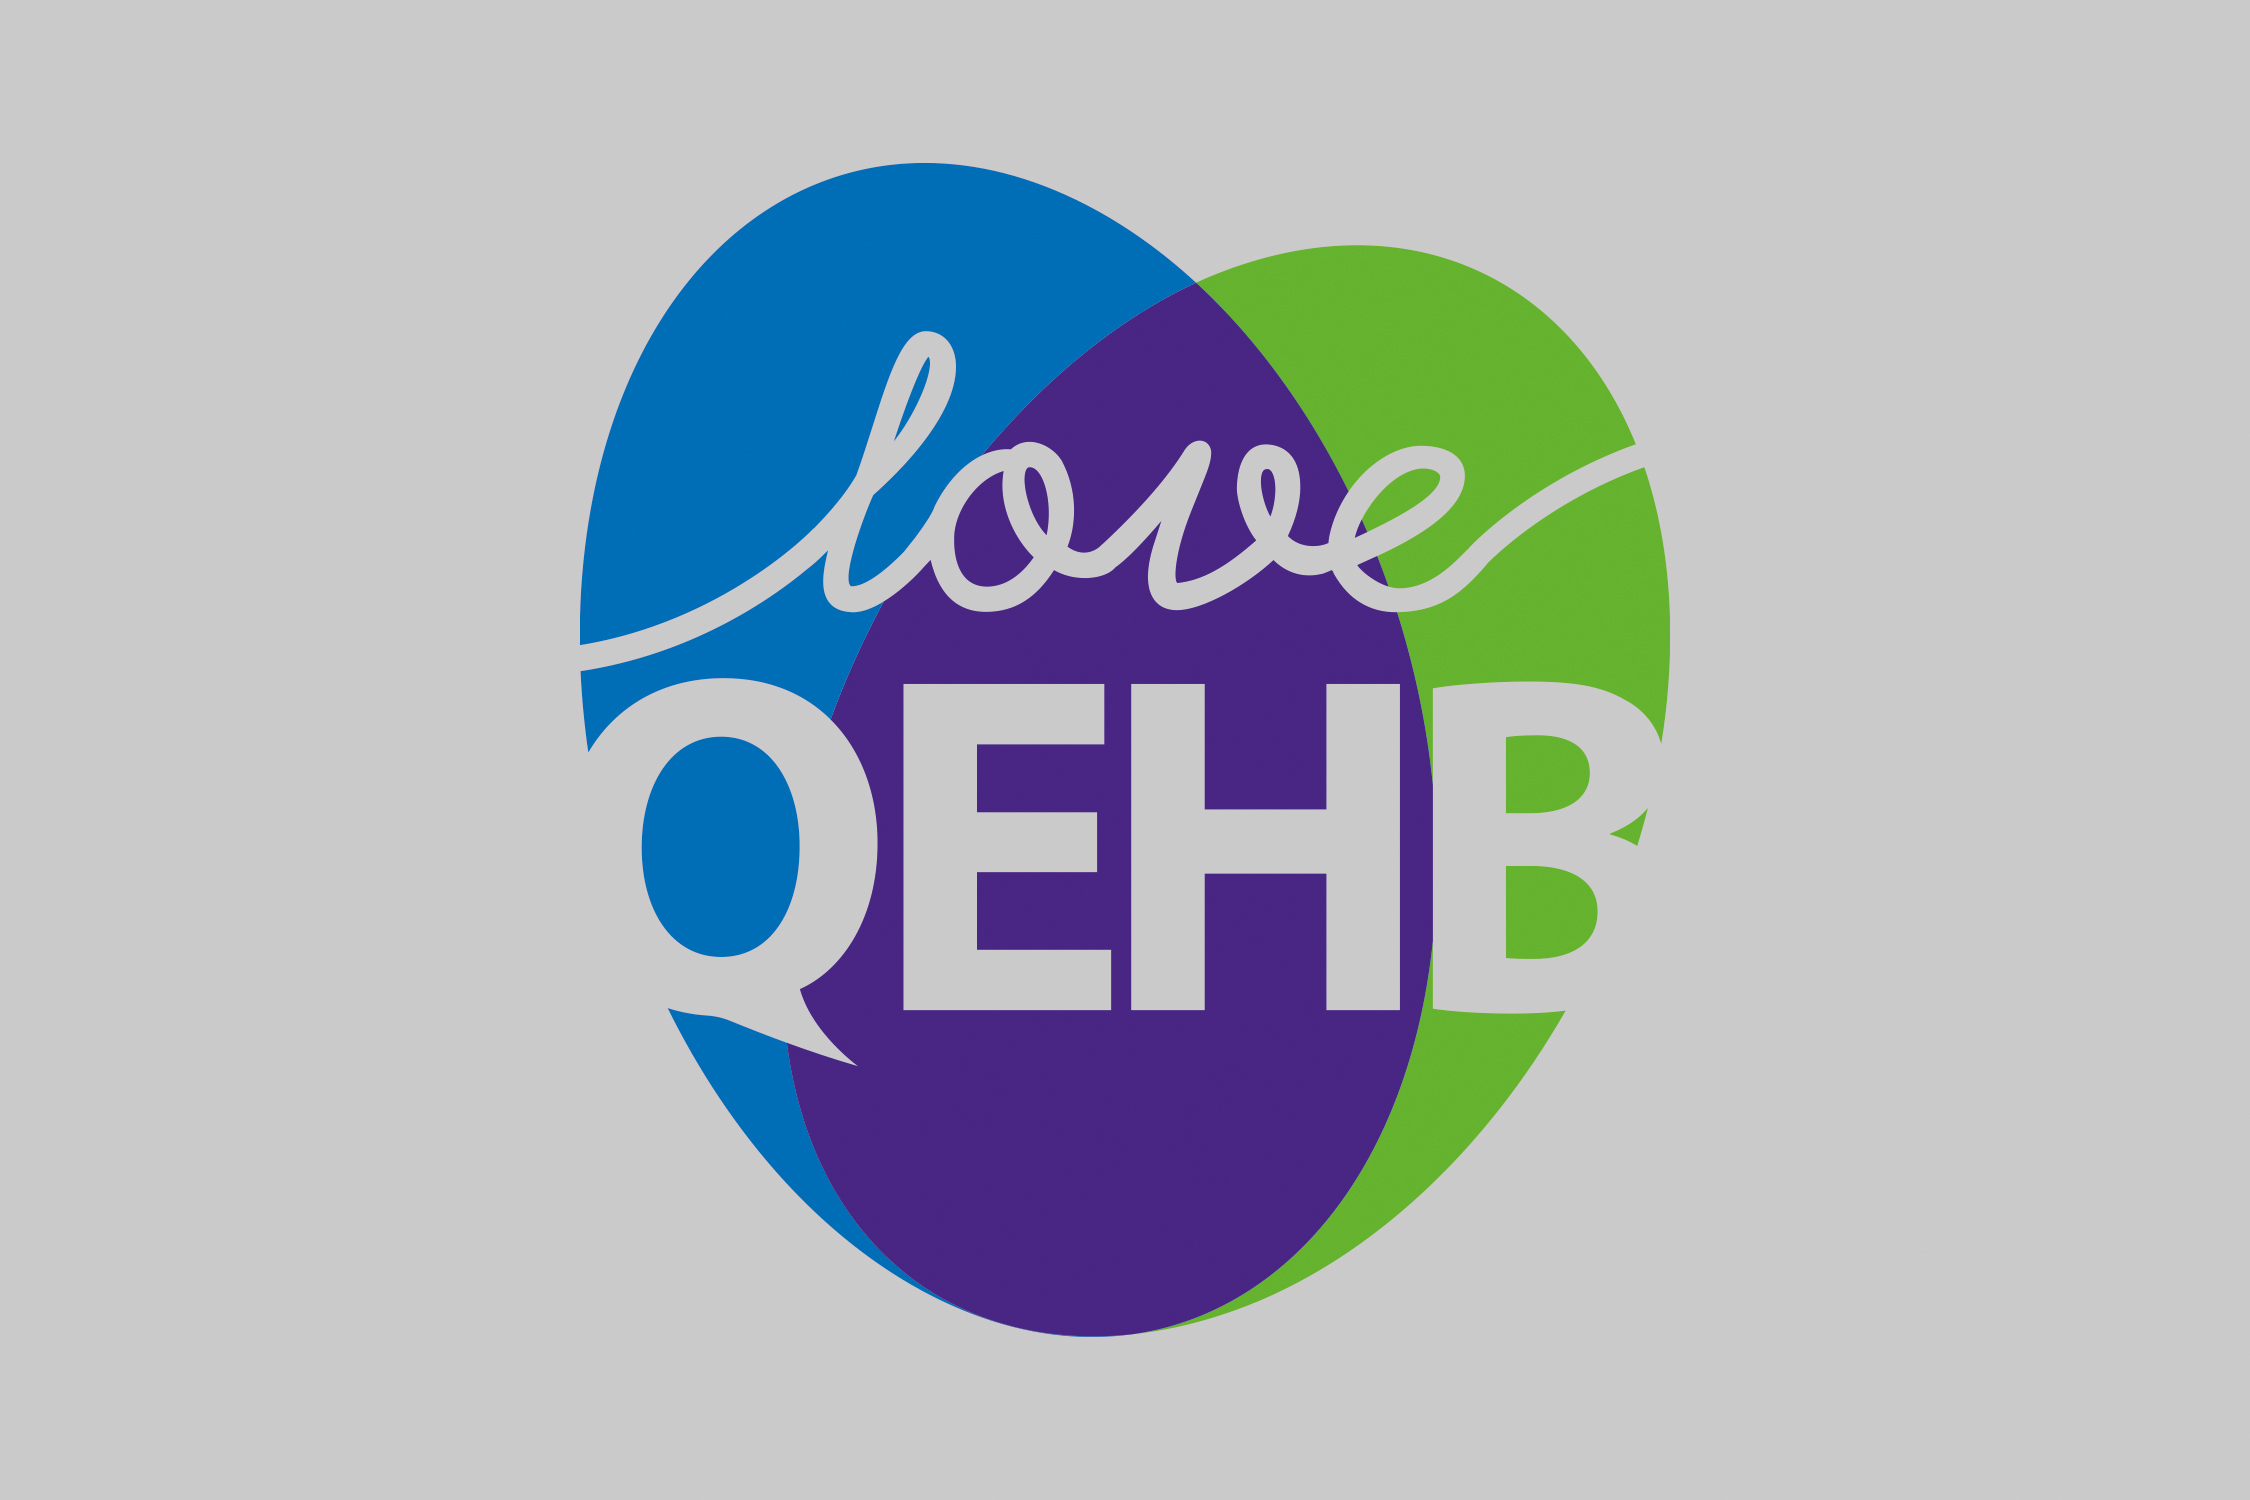 The 'QEHB Heart' sub-brand, consisting of green and blue overlapping ovals forming a heart shape. Overlaid on the heart are the words 'Love QEHB'